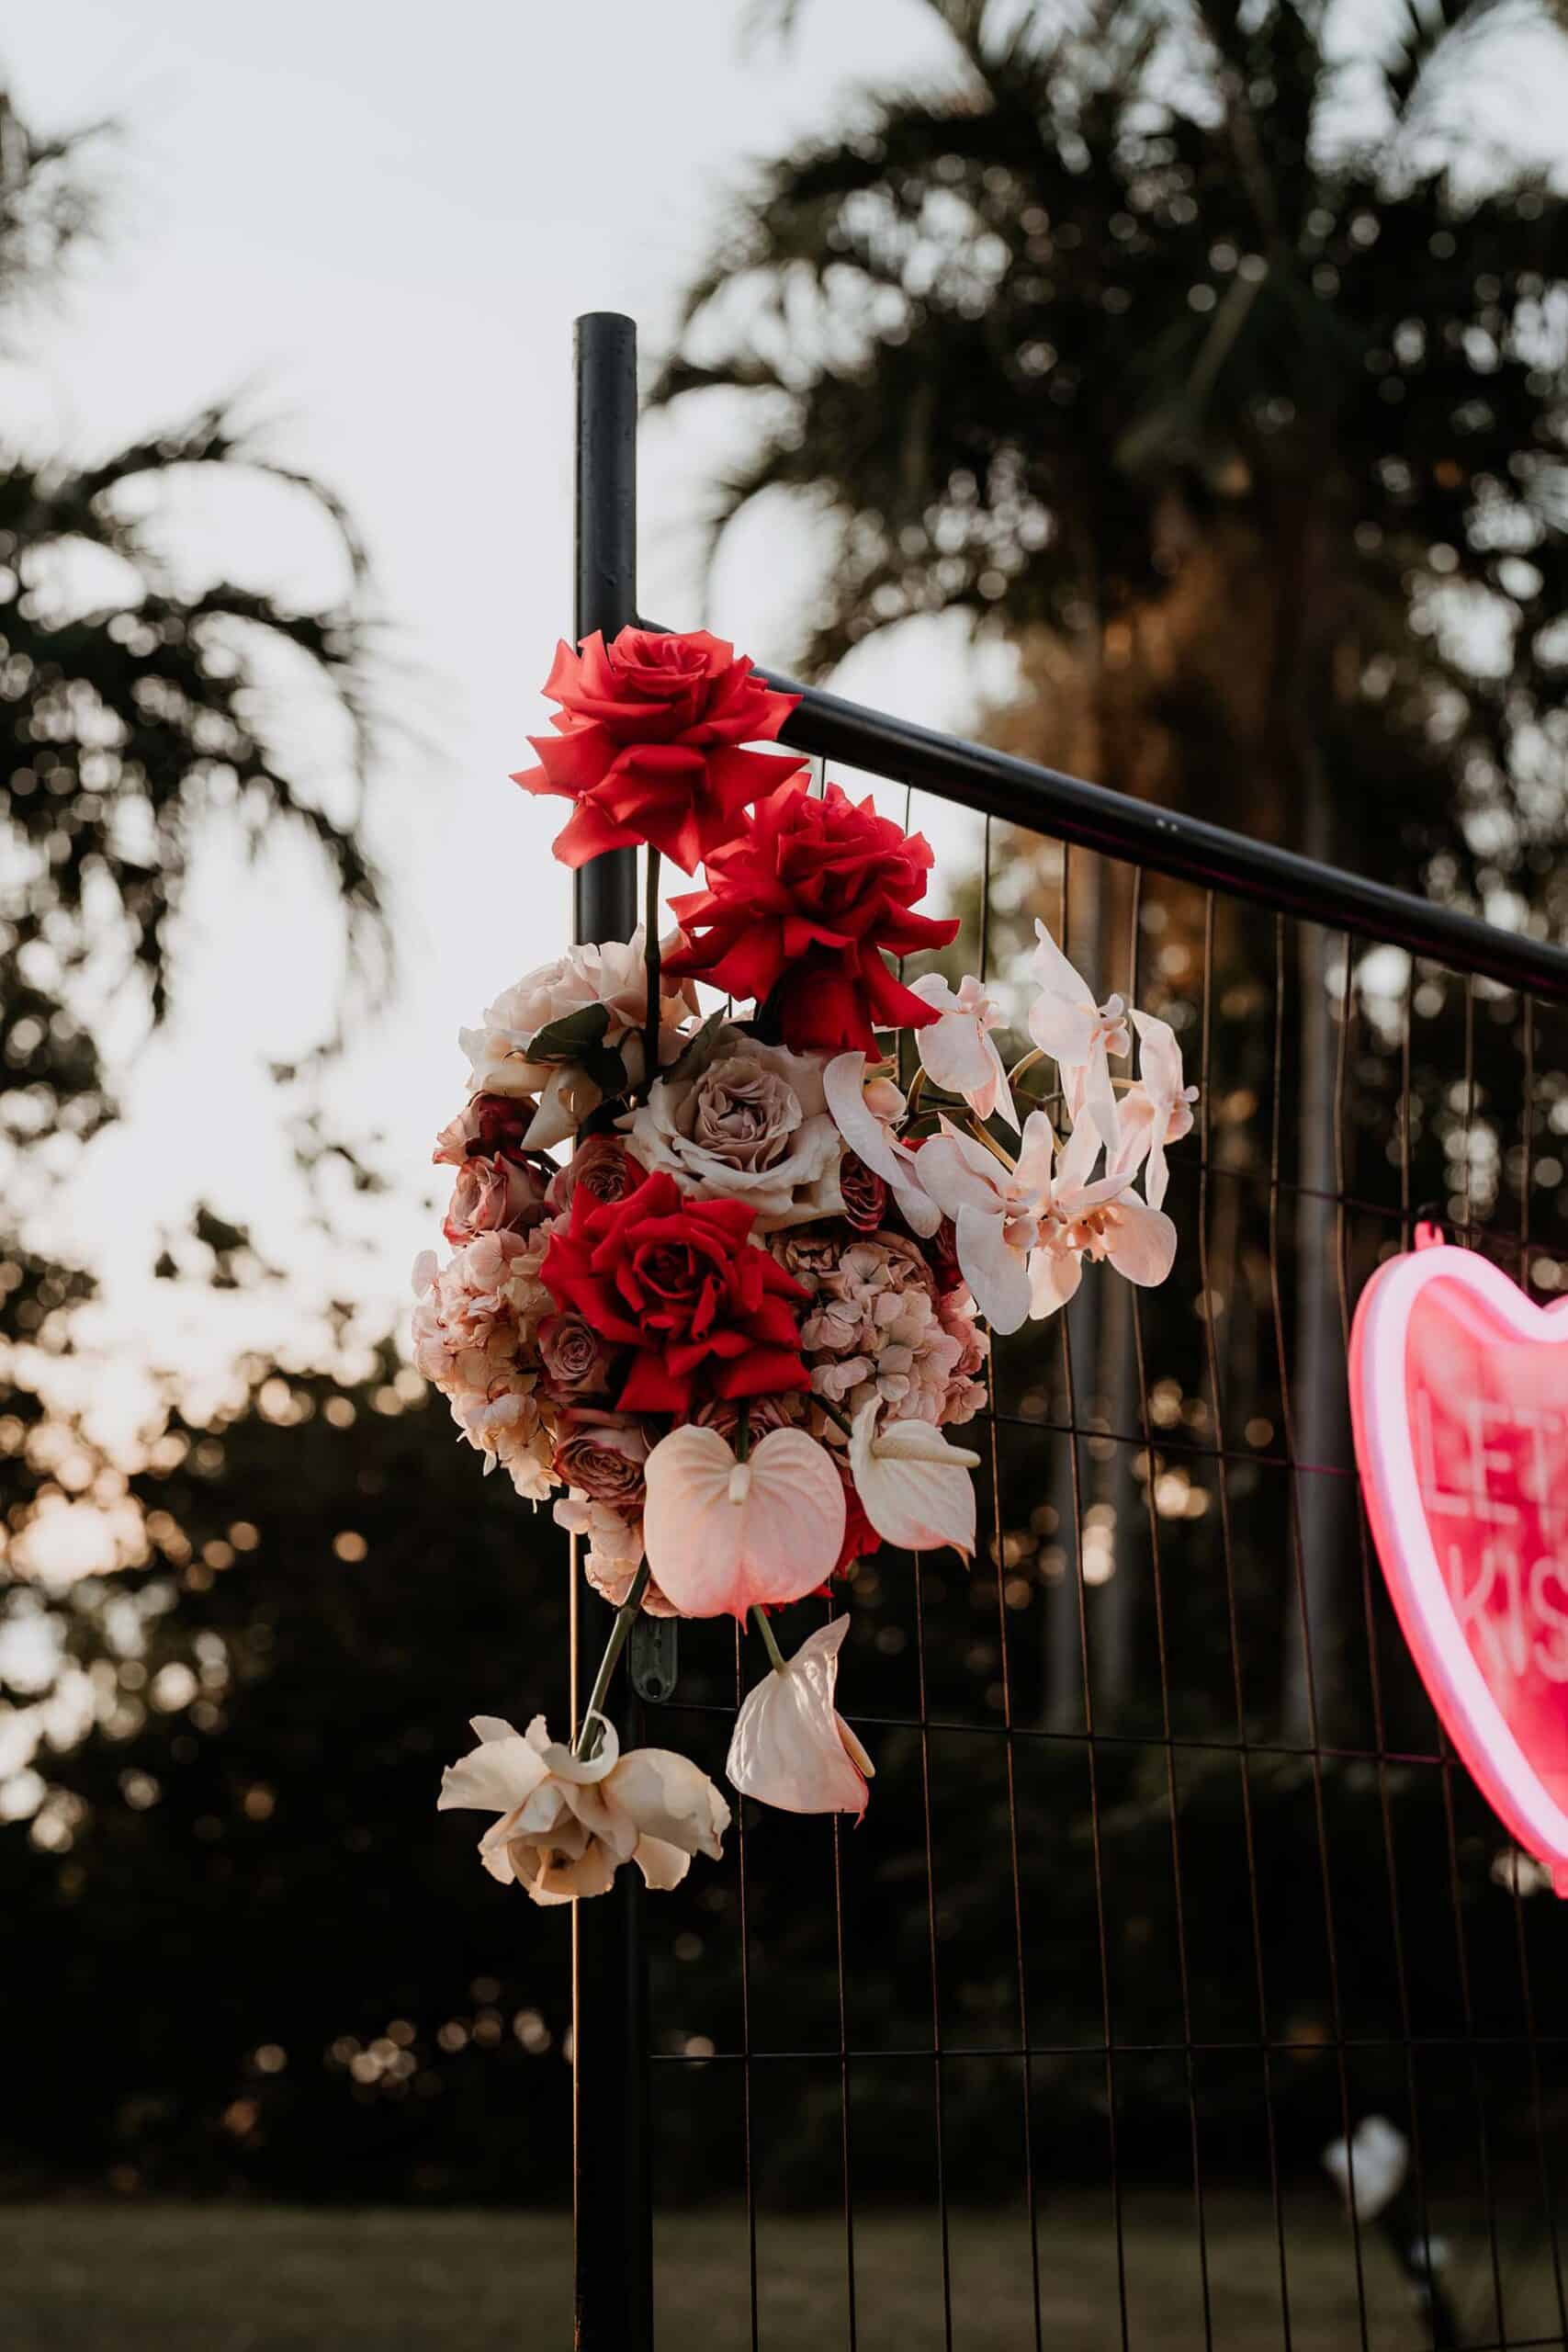 Hanging Flower Bouquet with red roses